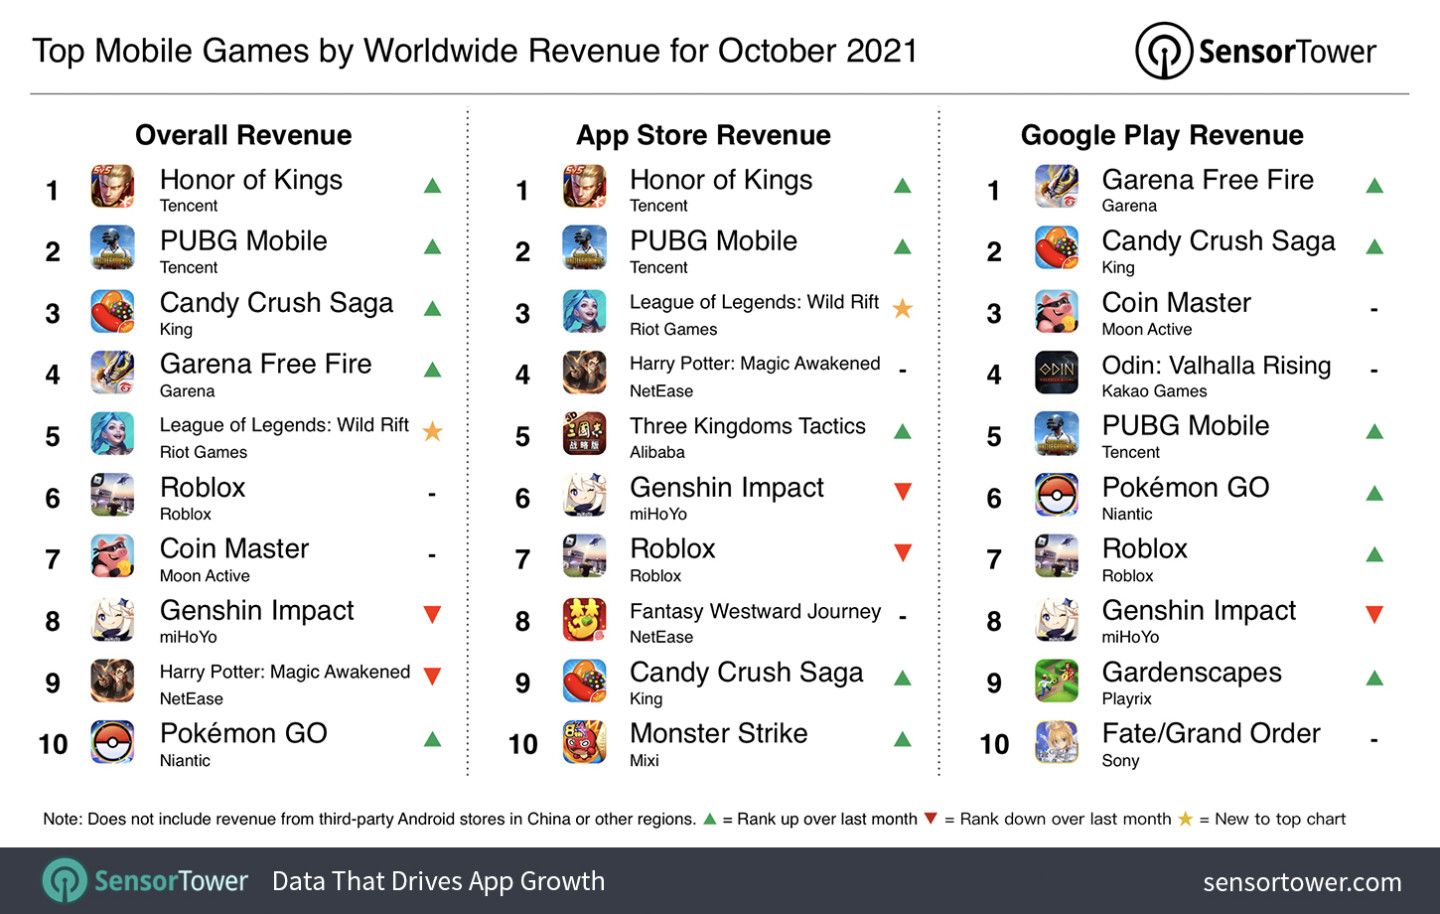 Top Grossing Mobile Games Worldwide for October 2021